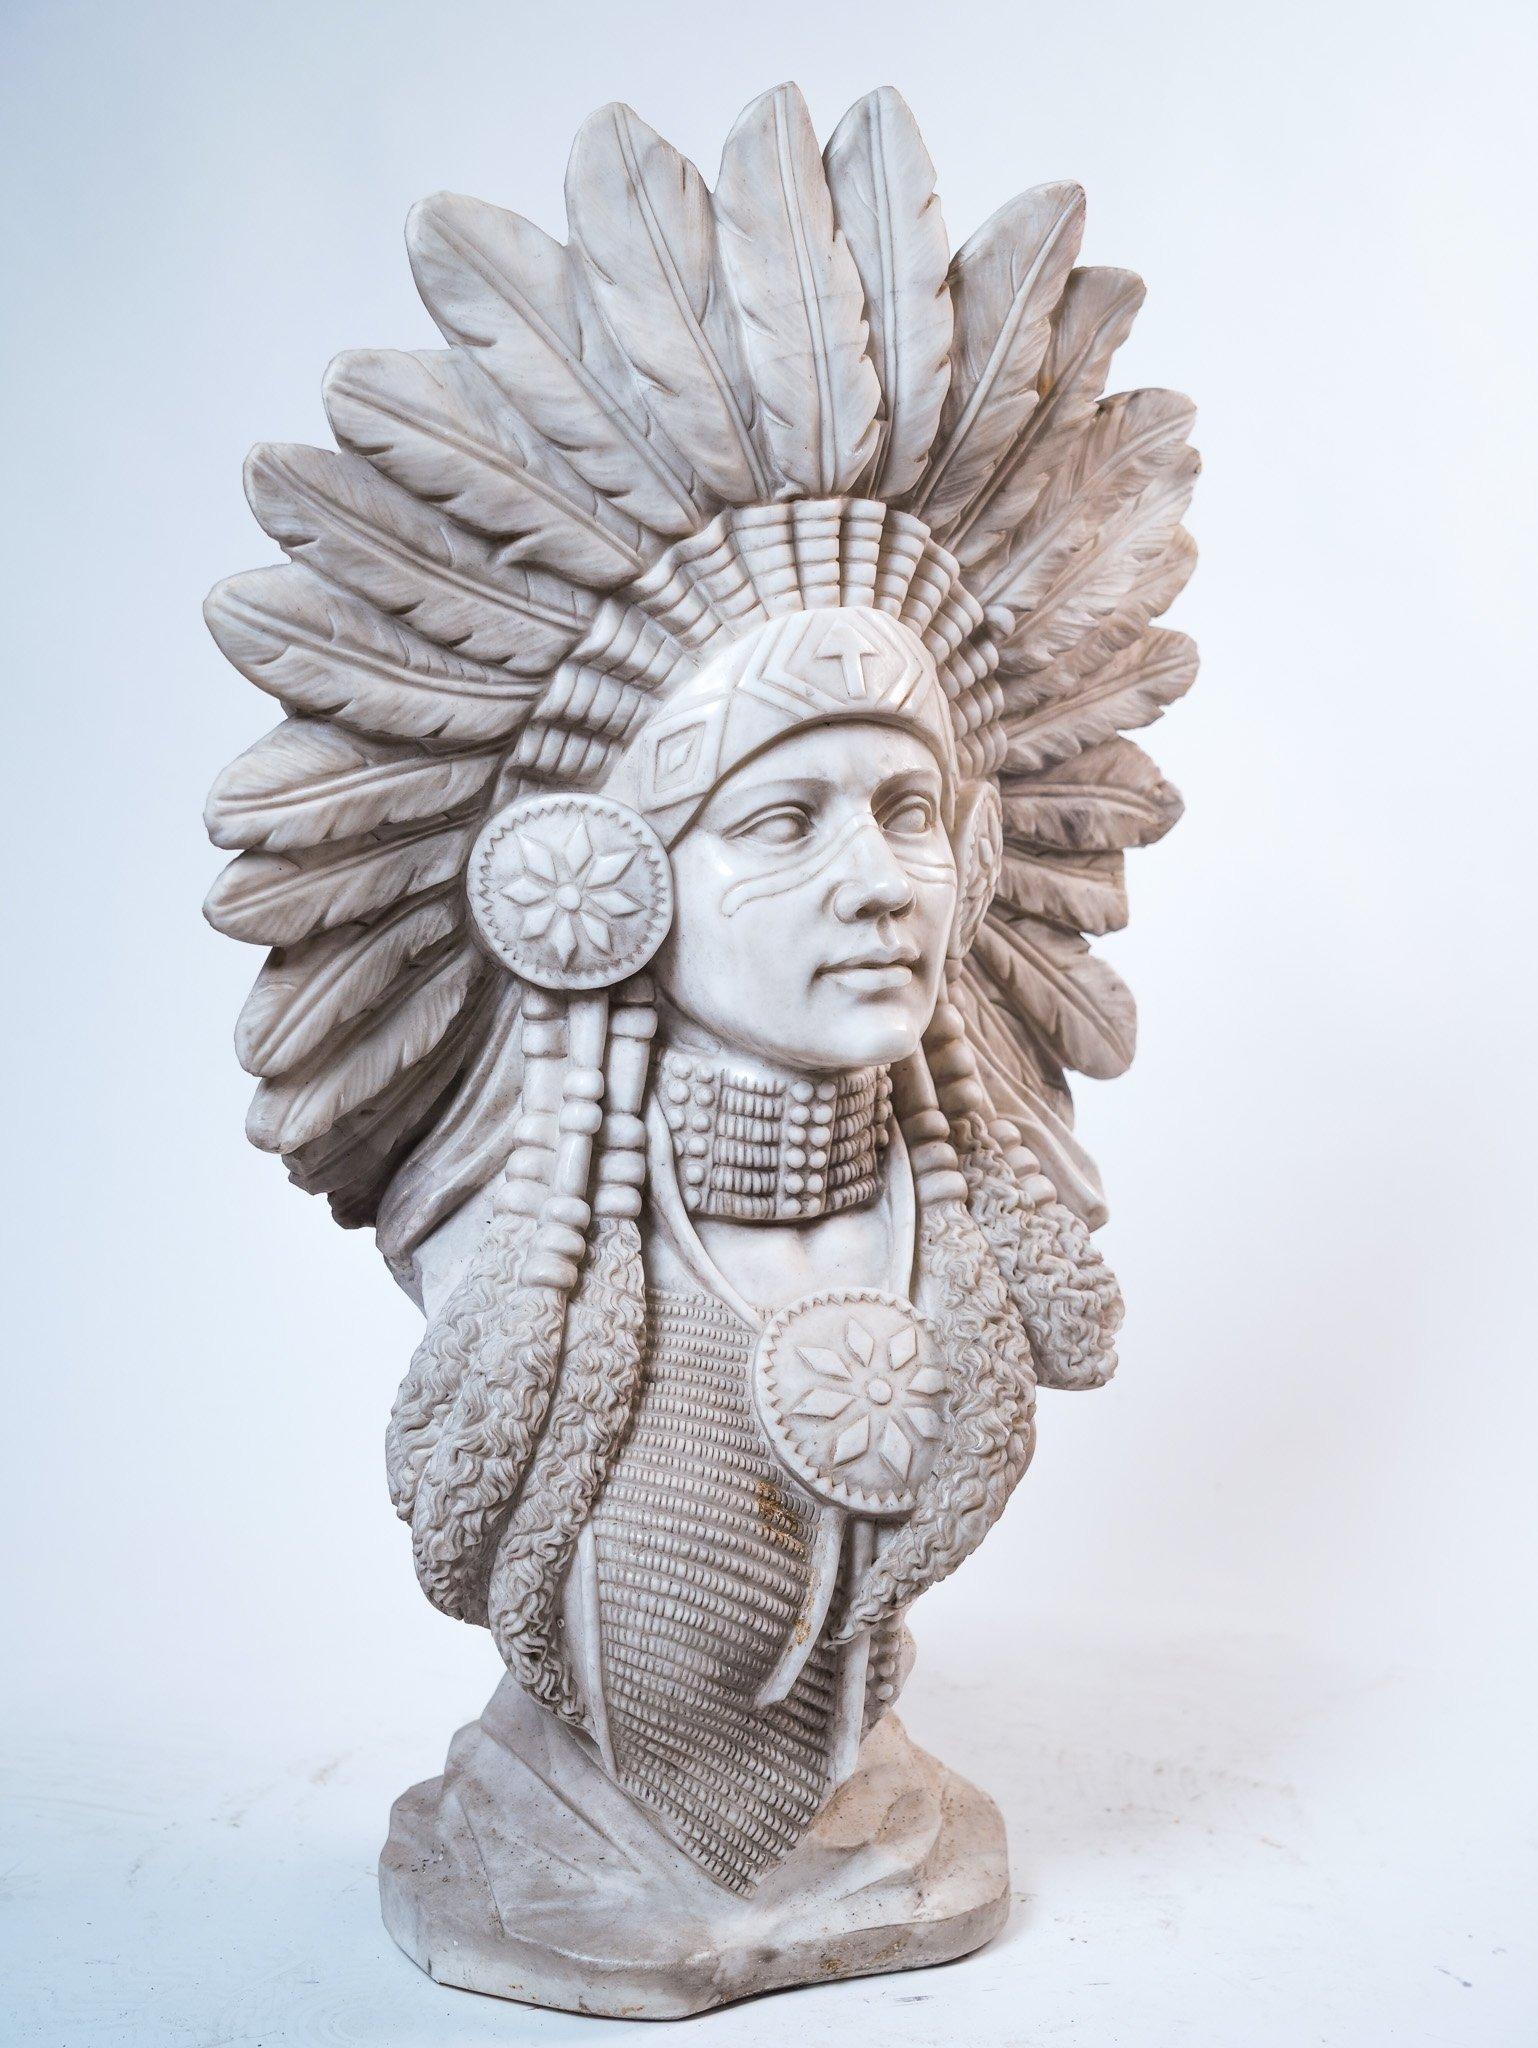 Description
Indian art marble sculpture, Apache woman. ADDITIONAL PHOTOS, INFORMATION OF THE LOT AND SHIPPING INFORMATION CAN BE REQUEST BY SENDING AN EMAIL. 
Tags: Scultura Indiana art. arte de la escultura india. Art de la sculpture indienne.